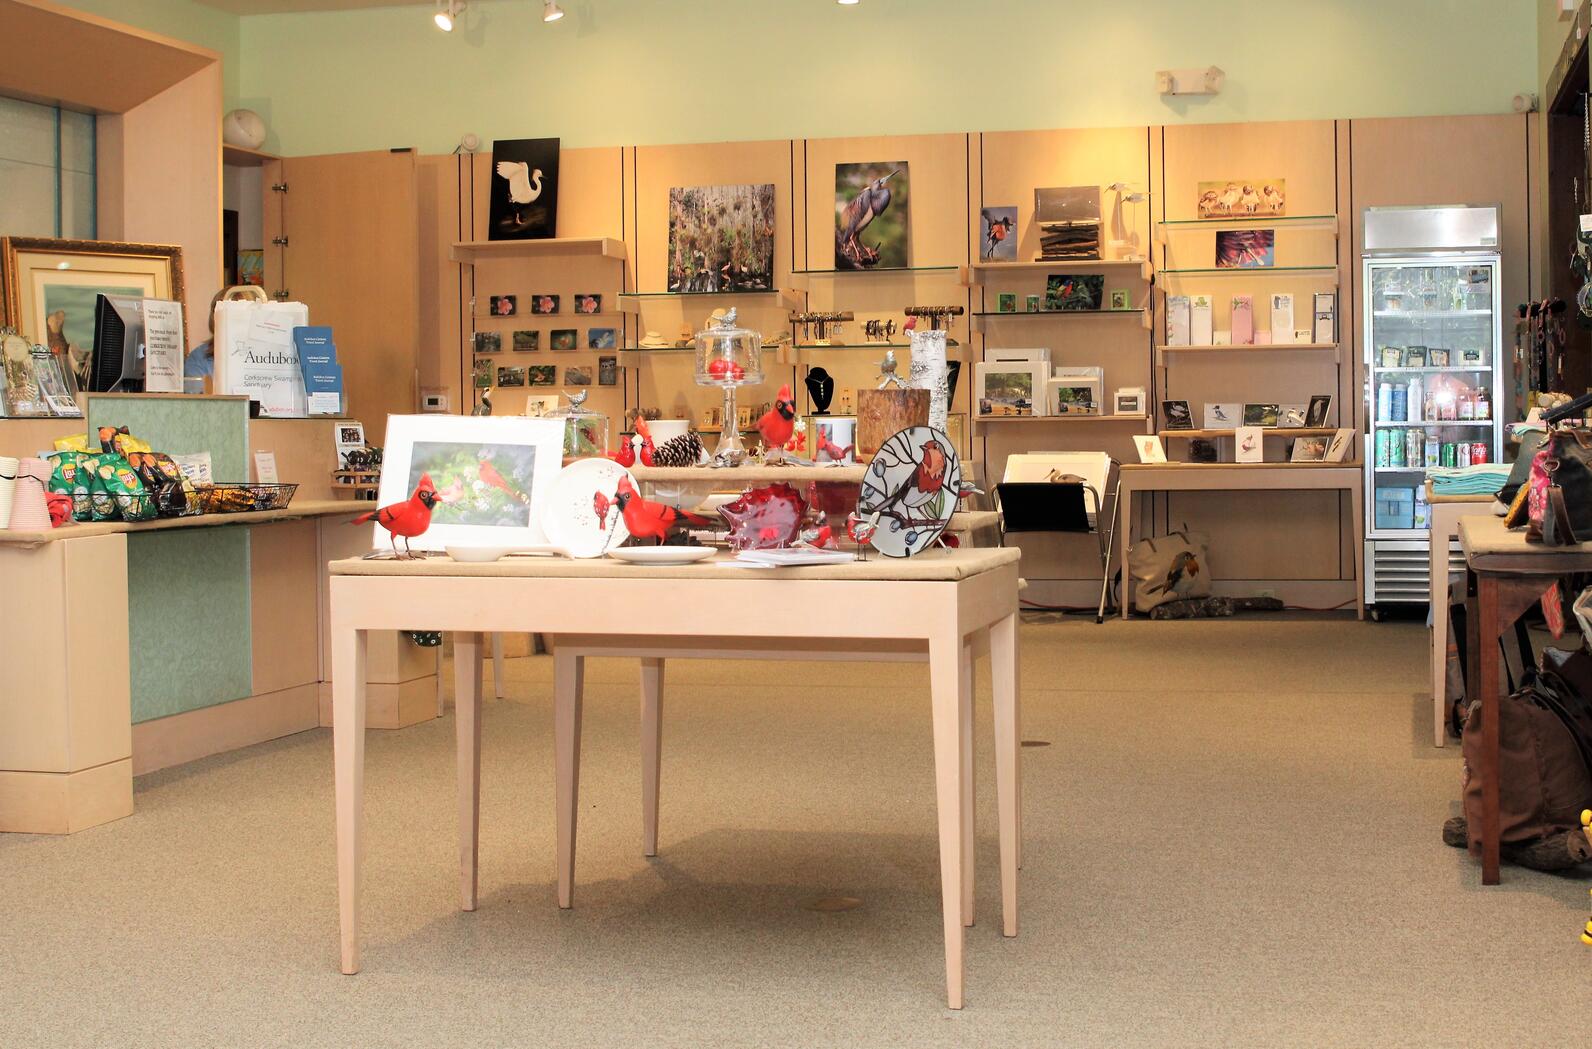 Store interior with a large table and merchandise.